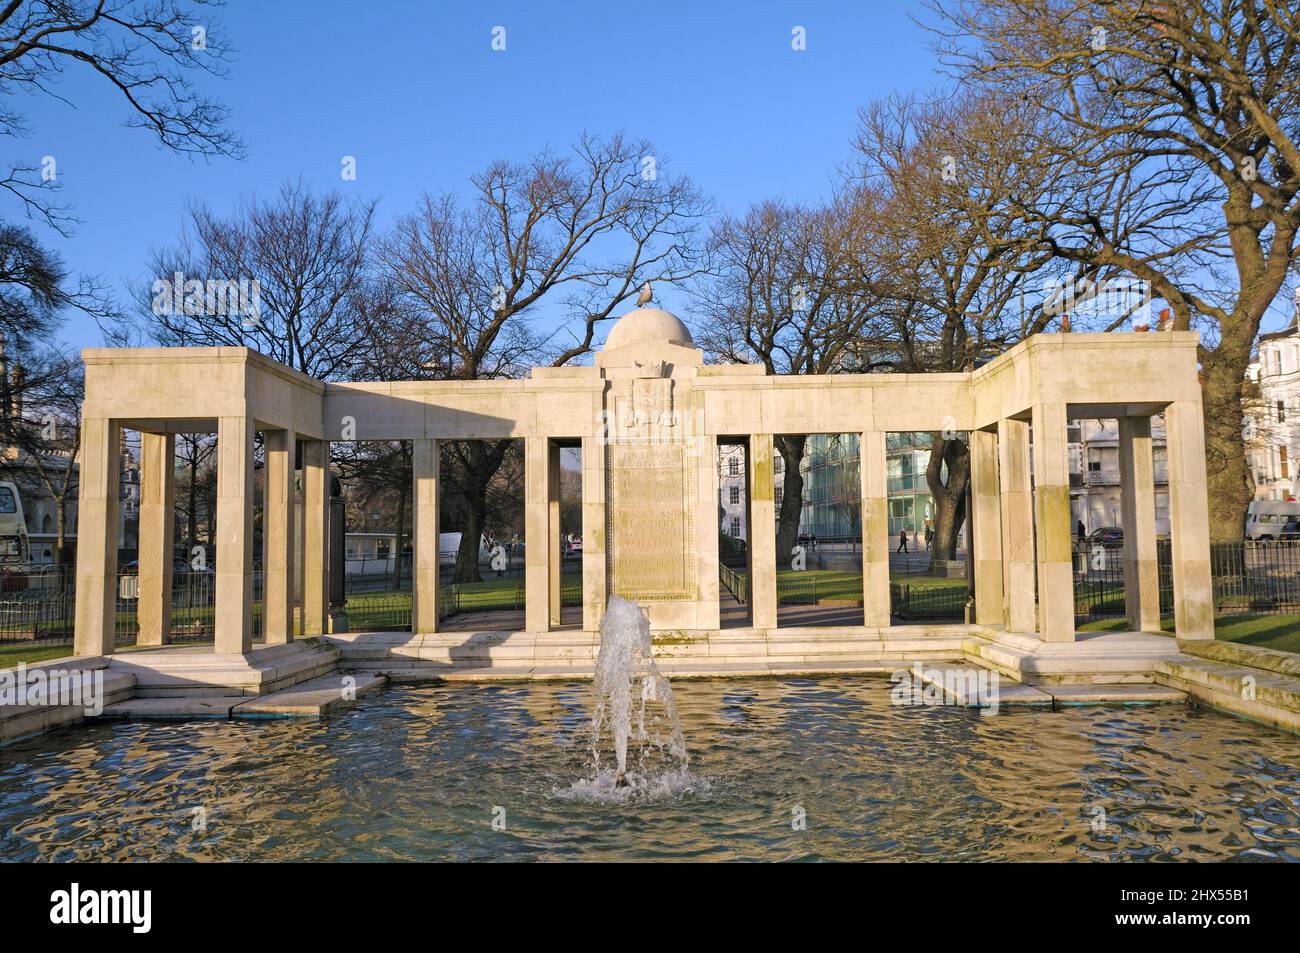 Brighton War Memorial, commemorating the fallen of The First World War, Old Steine Gardens, City of Brighton and Hove, East Sussex, England, UK Stock Photo